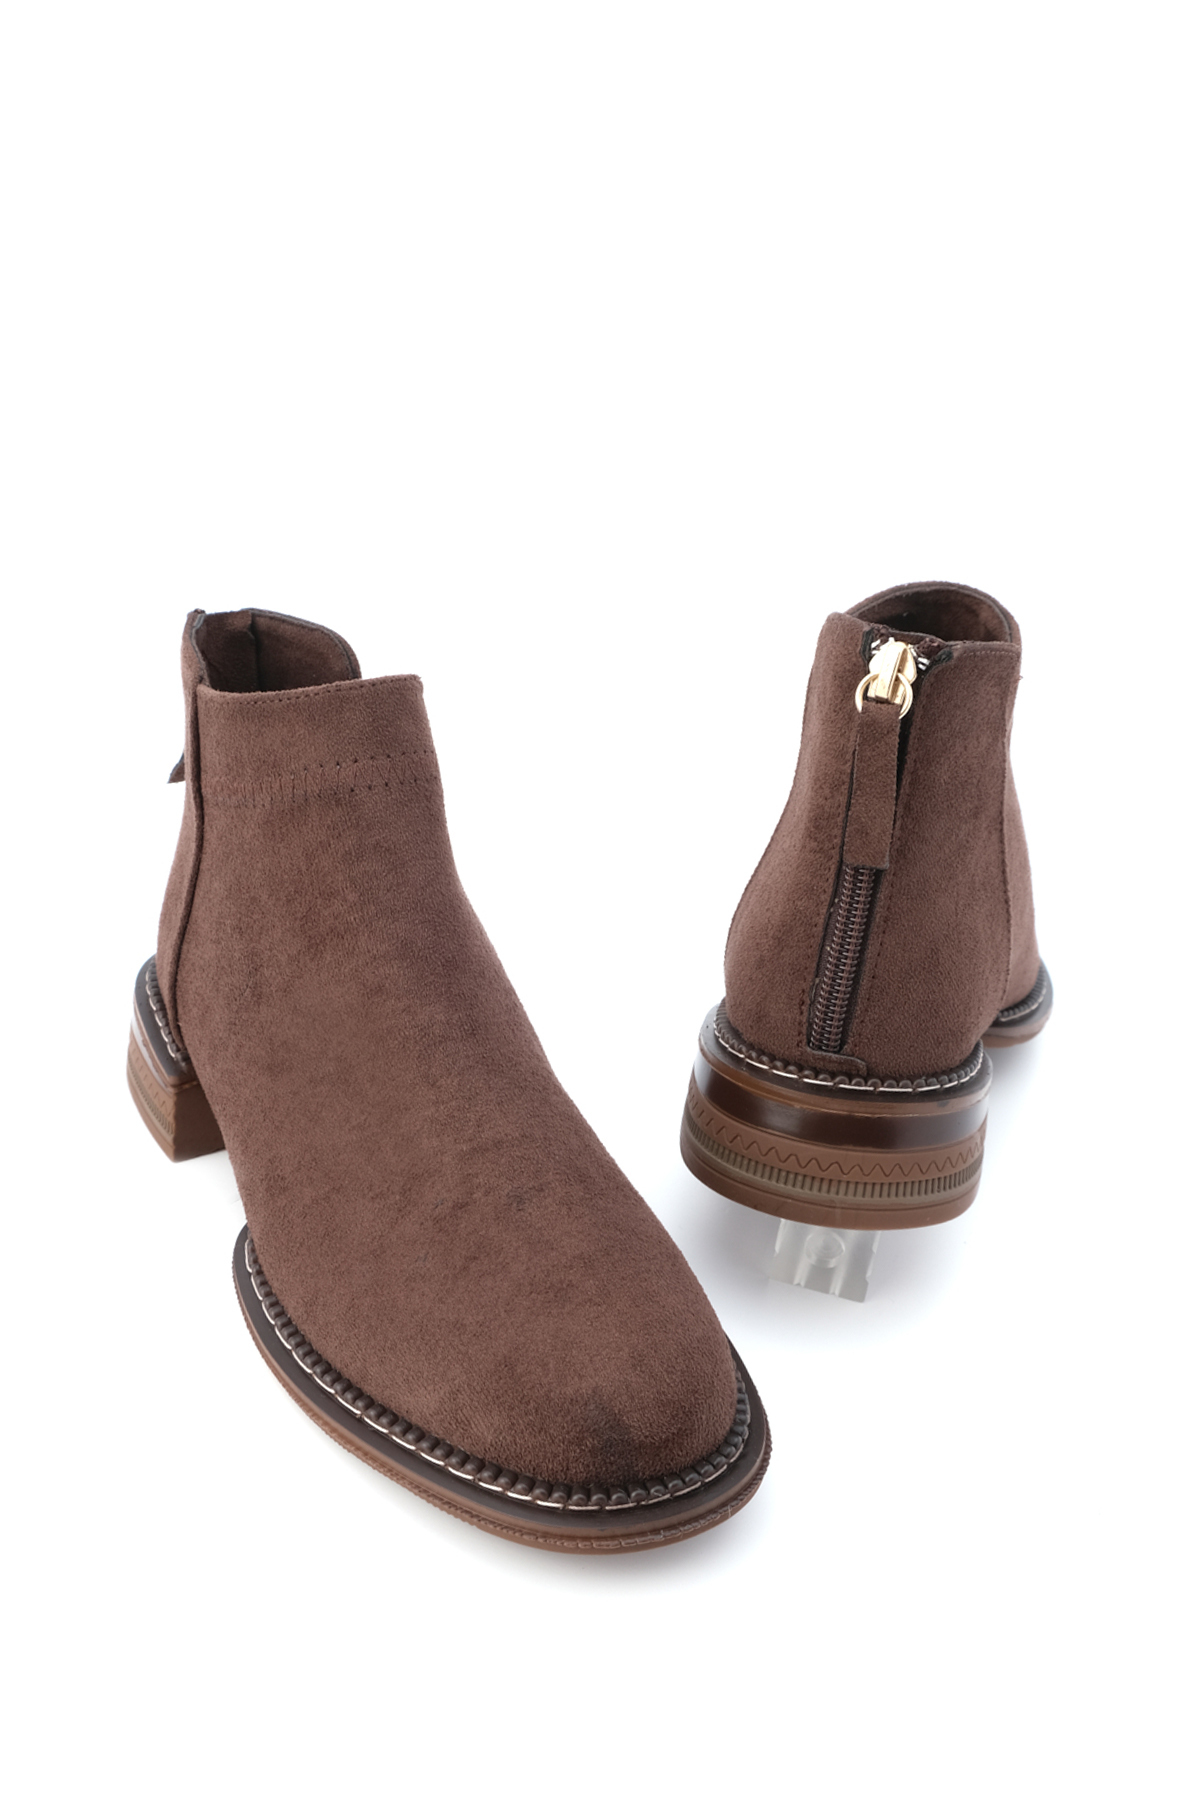 Levně Marjin Women's Casual Boots & Booties With Zipper At The Back Efren Brown.